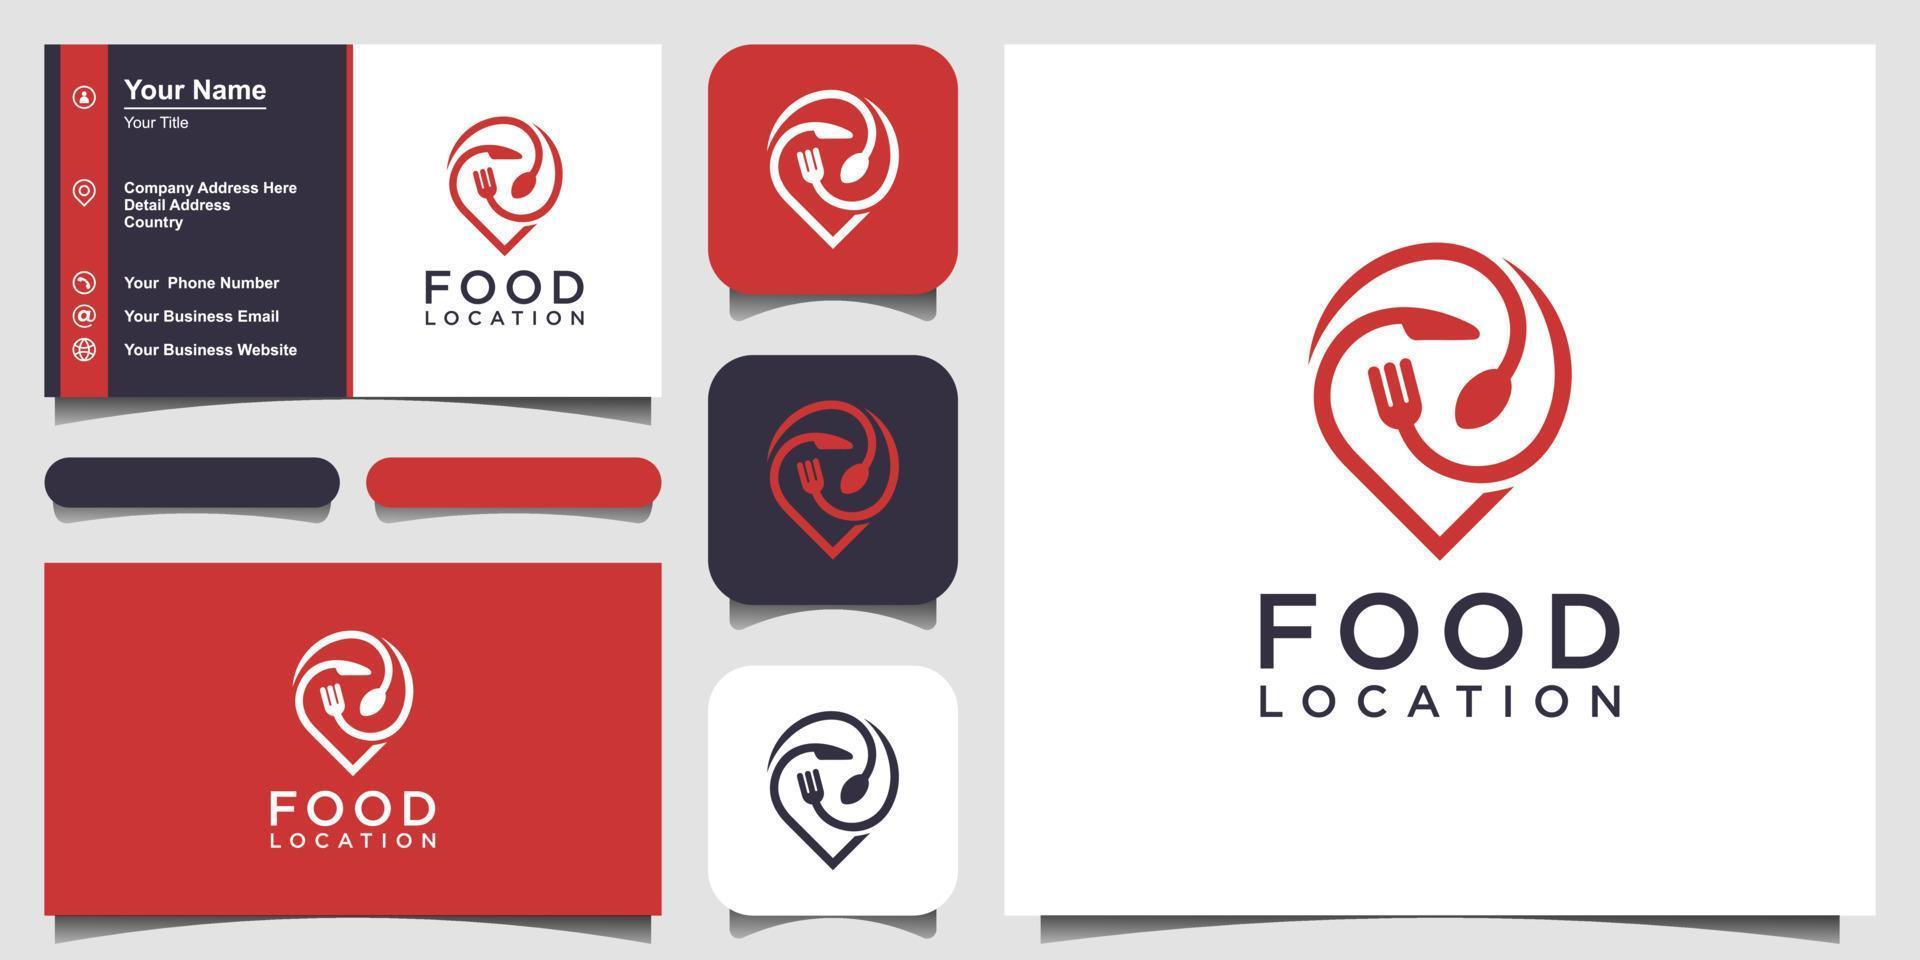 food location logo design, with the concept of a pin icon combined with a fork, knife and spoon. business card design vector